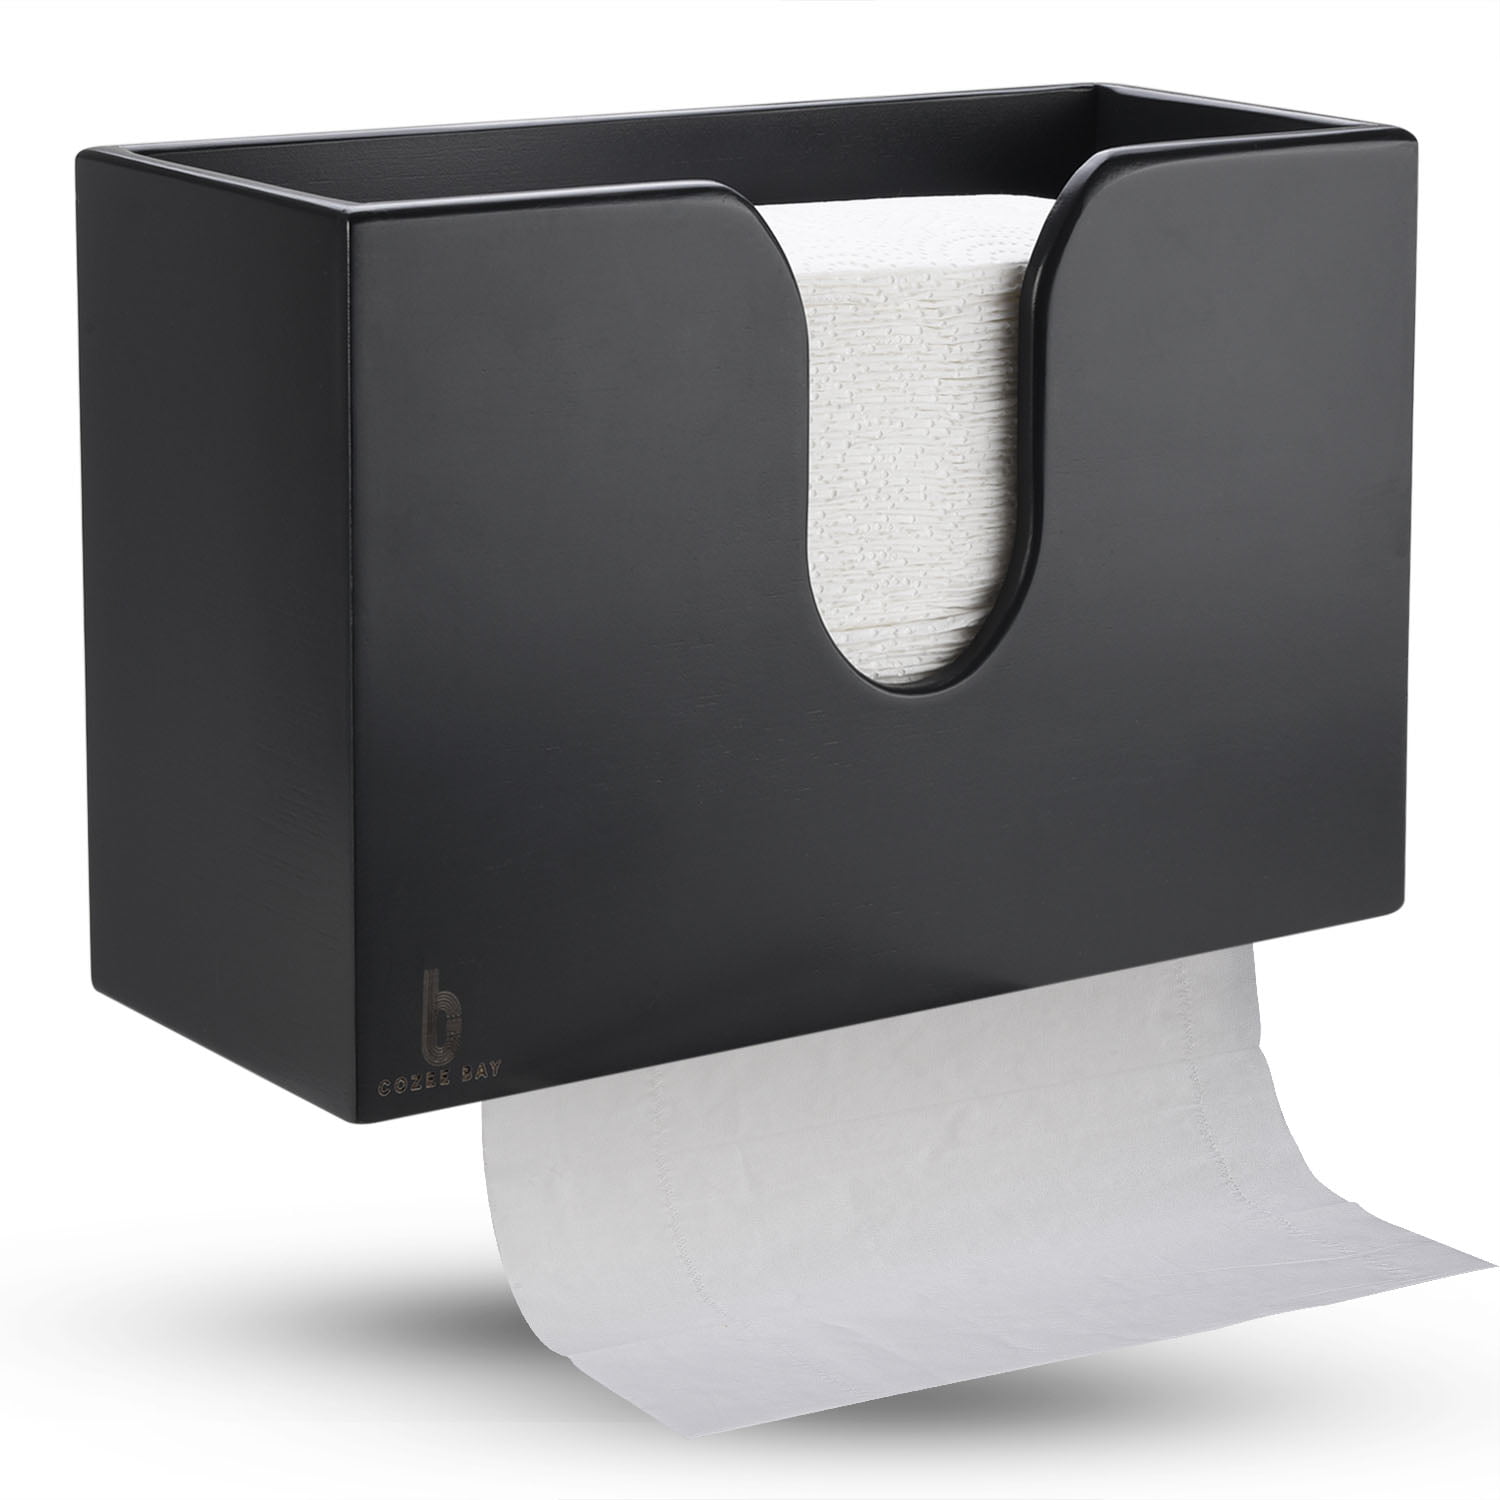 Details about  / mDesign Wall Mount 2 Pieces Black Under Cabinet Paper Towel Holder